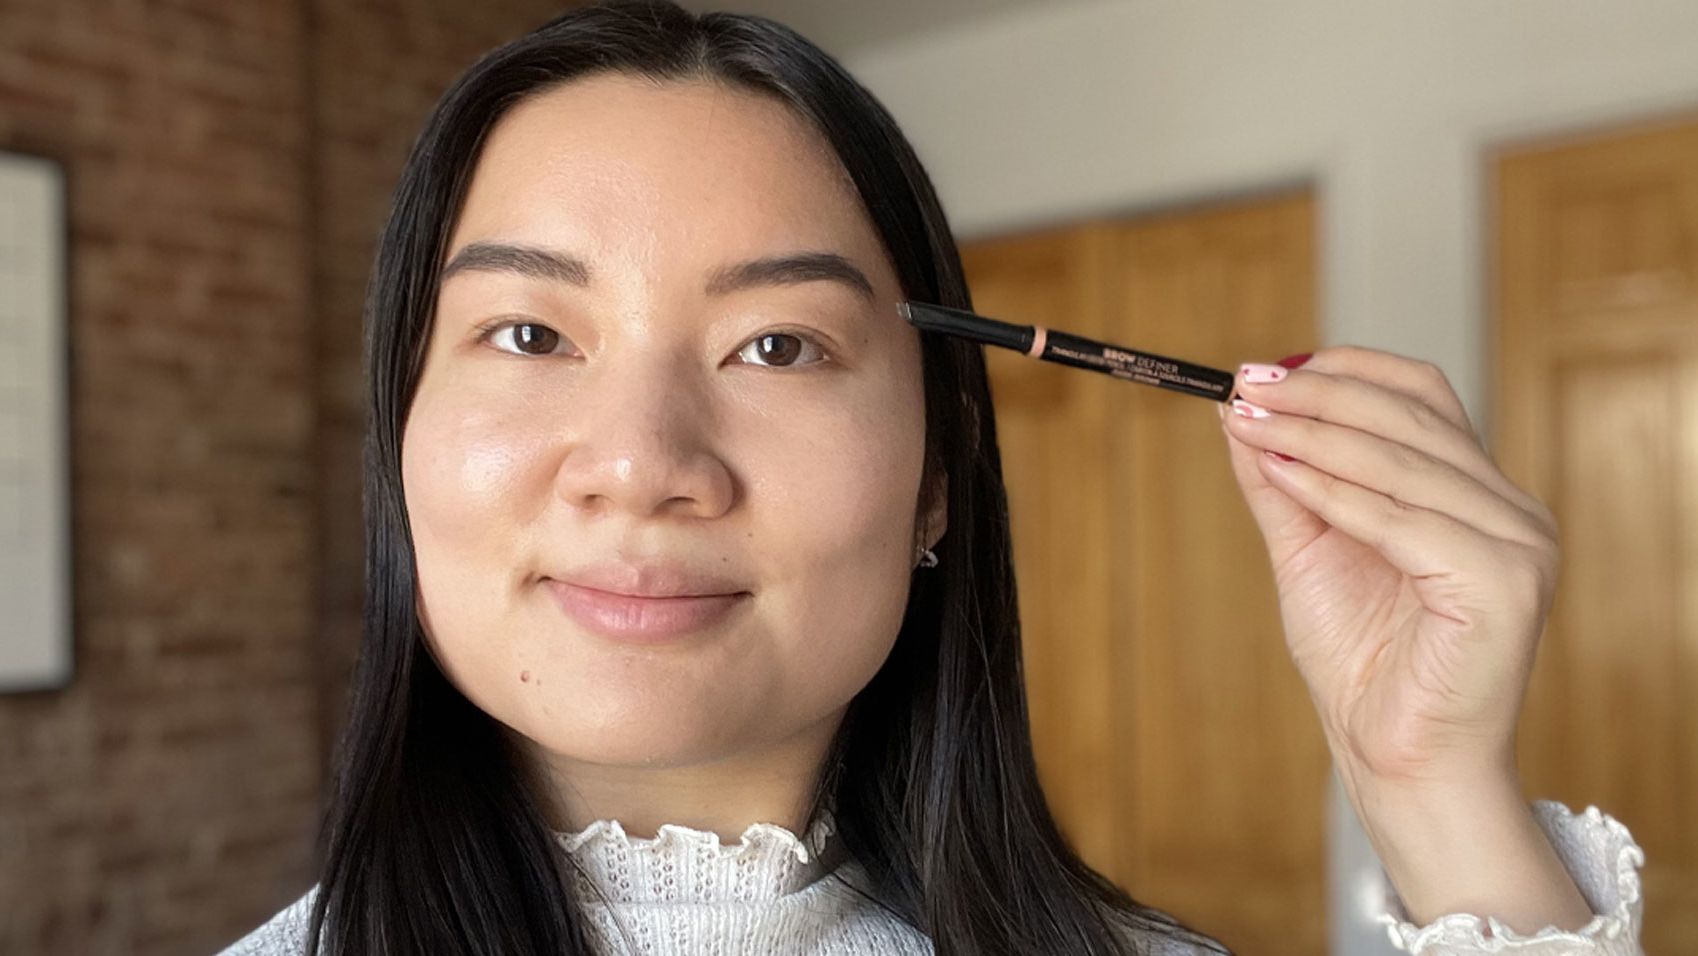 3 Simple Steps for Perfectly Sculpted Brows at Home with IT